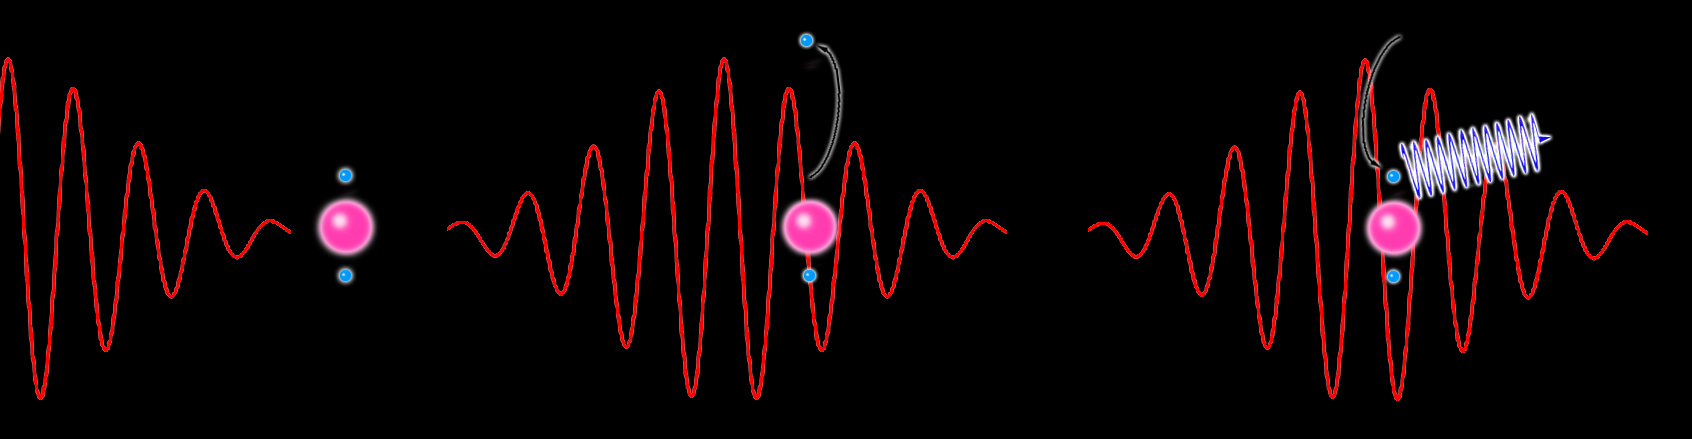 Long-wavelength laser light approaches an atom (left). The laser pulse ionizes the atom by boosting one of its electrons (center), but before it can escape, the light’s electric field reverses and forces the electron to recombine with the atom (right). The electron’s extra aquired energy is released as an attosecond burst of high-frequency x-rays (length of the pulse exaggerated for clarity). 